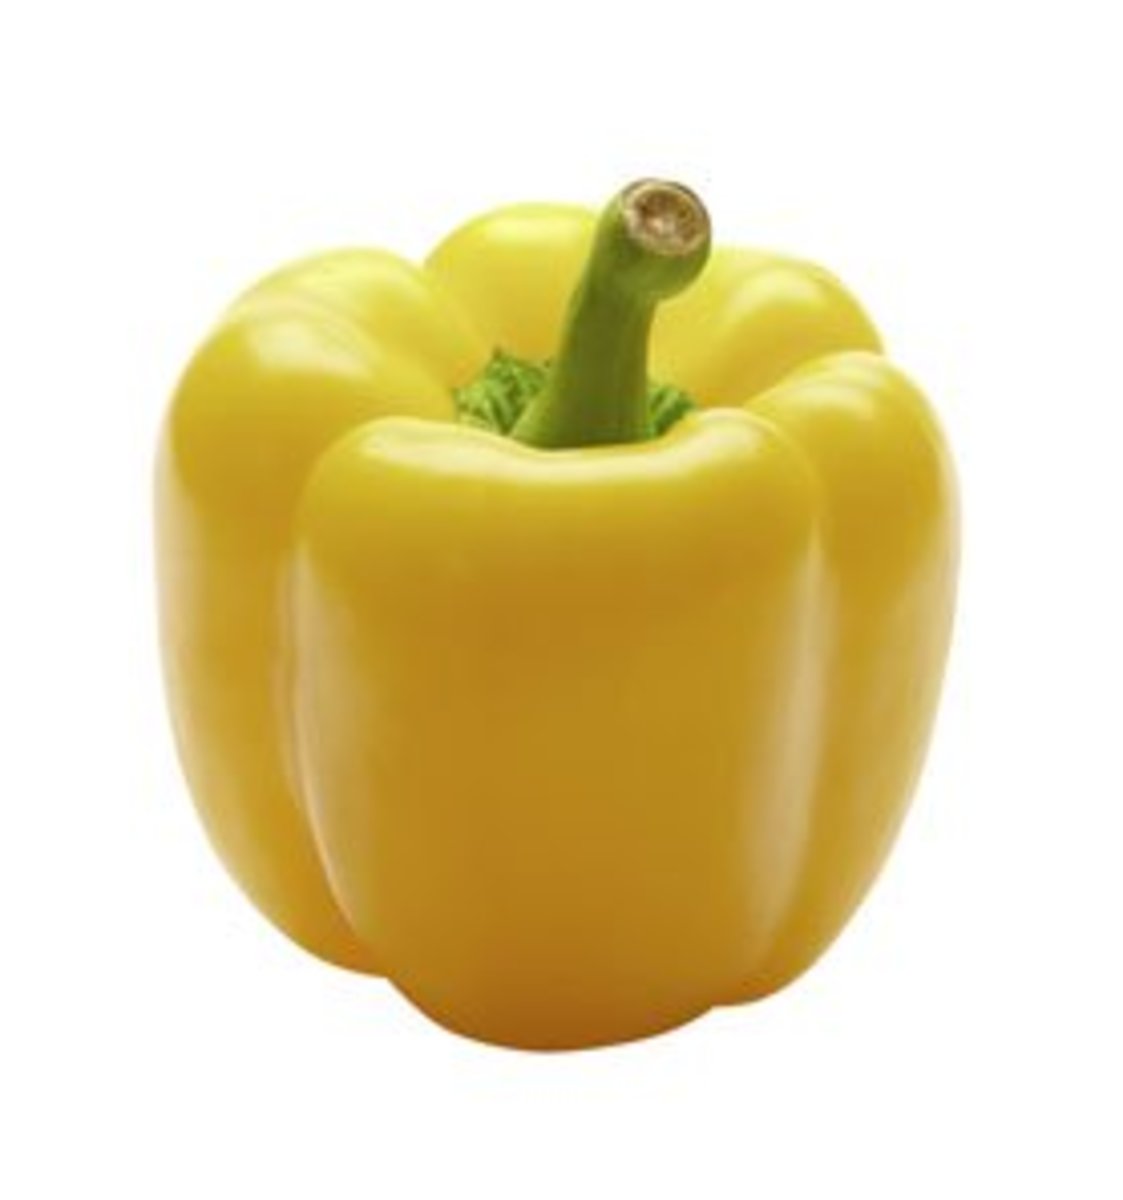 Yellow bell peppers are good plain or cooked.